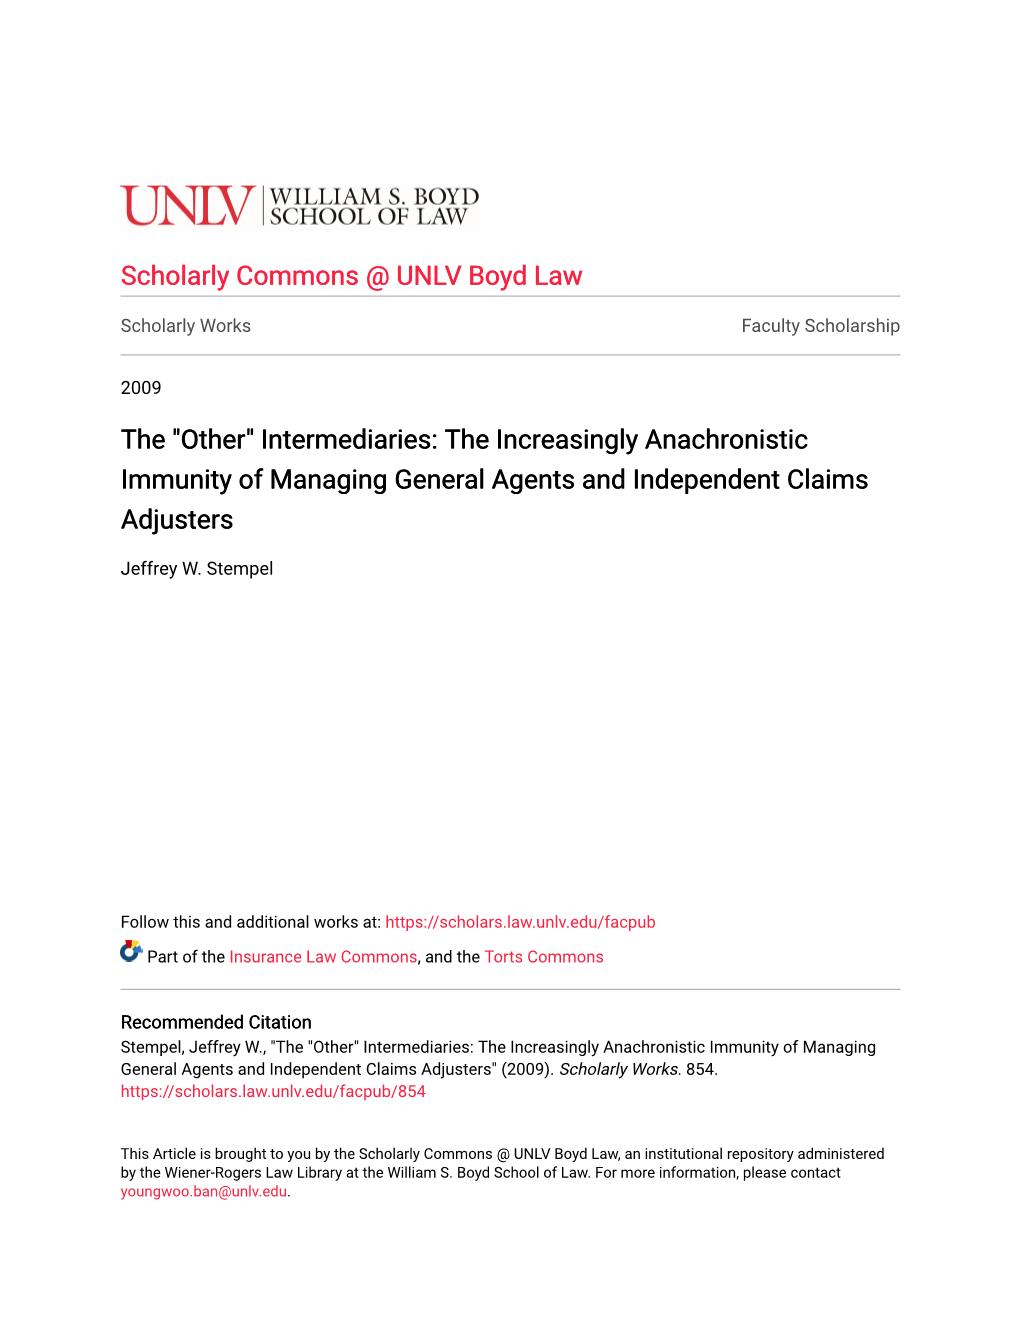 The Increasingly Anachronistic Immunity of Managing General Agents and Independent Claims Adjusters